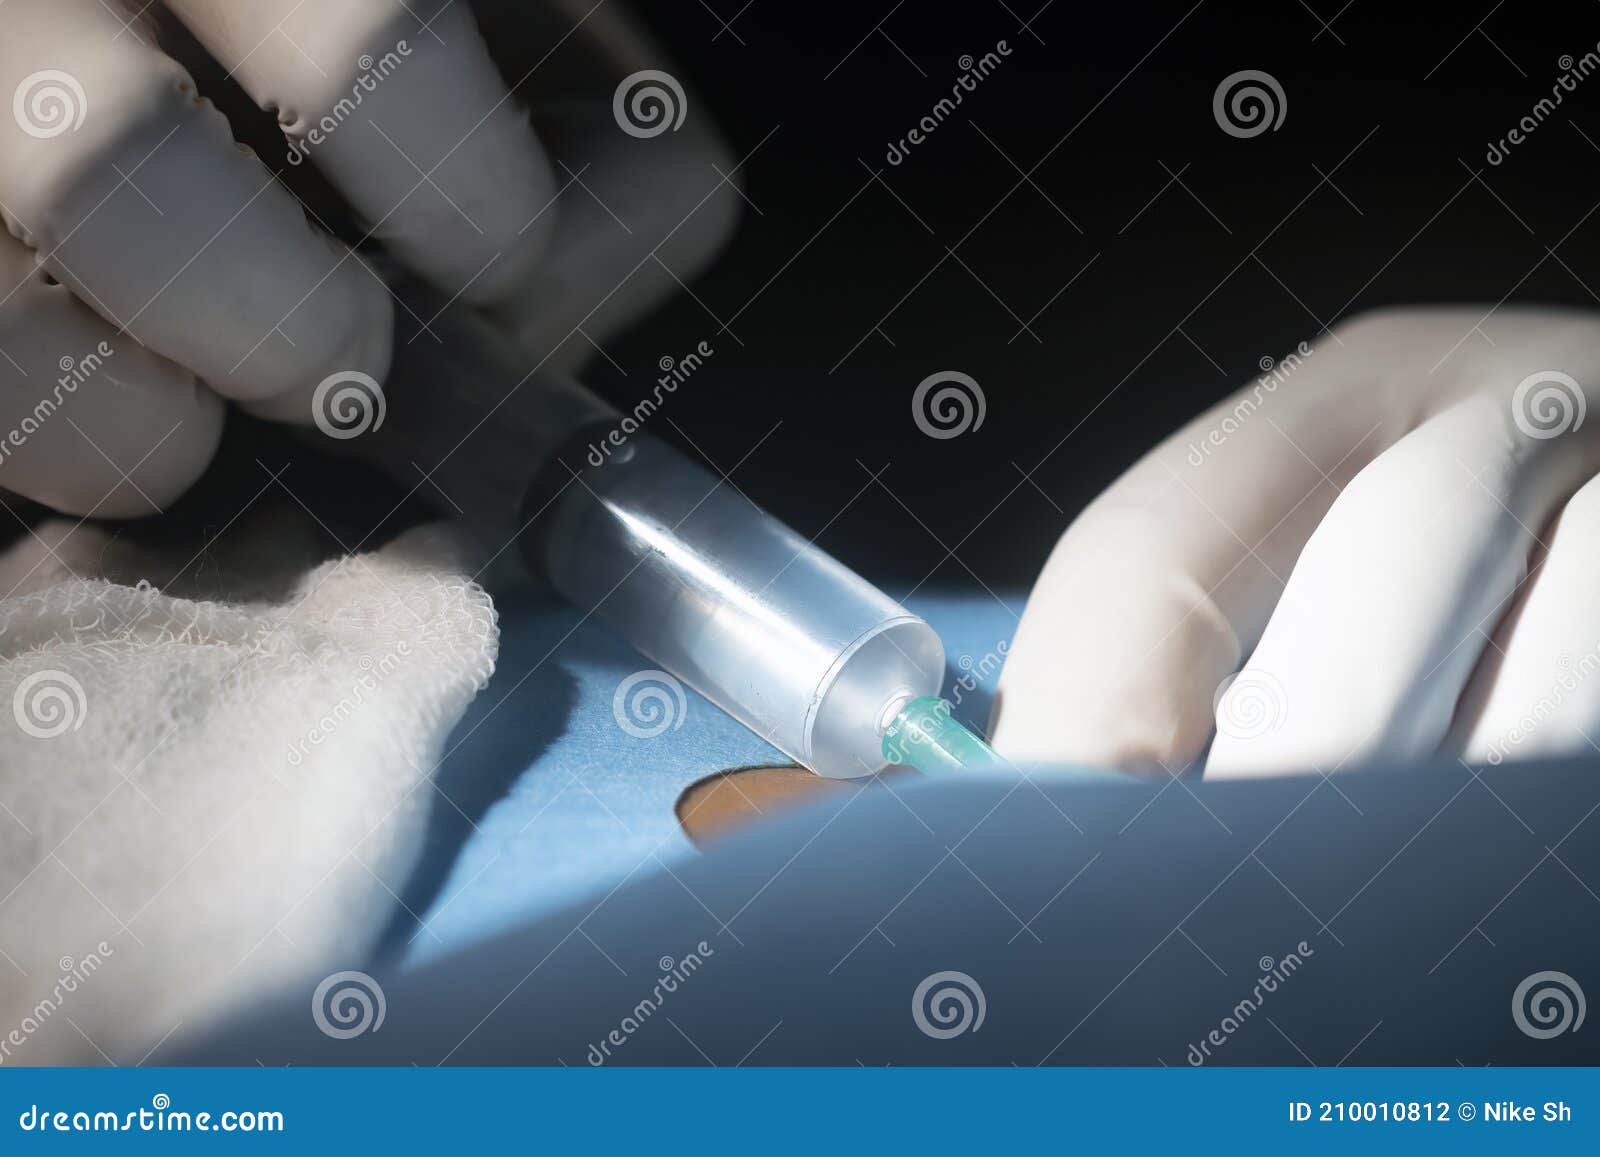 injecting local anesthesia